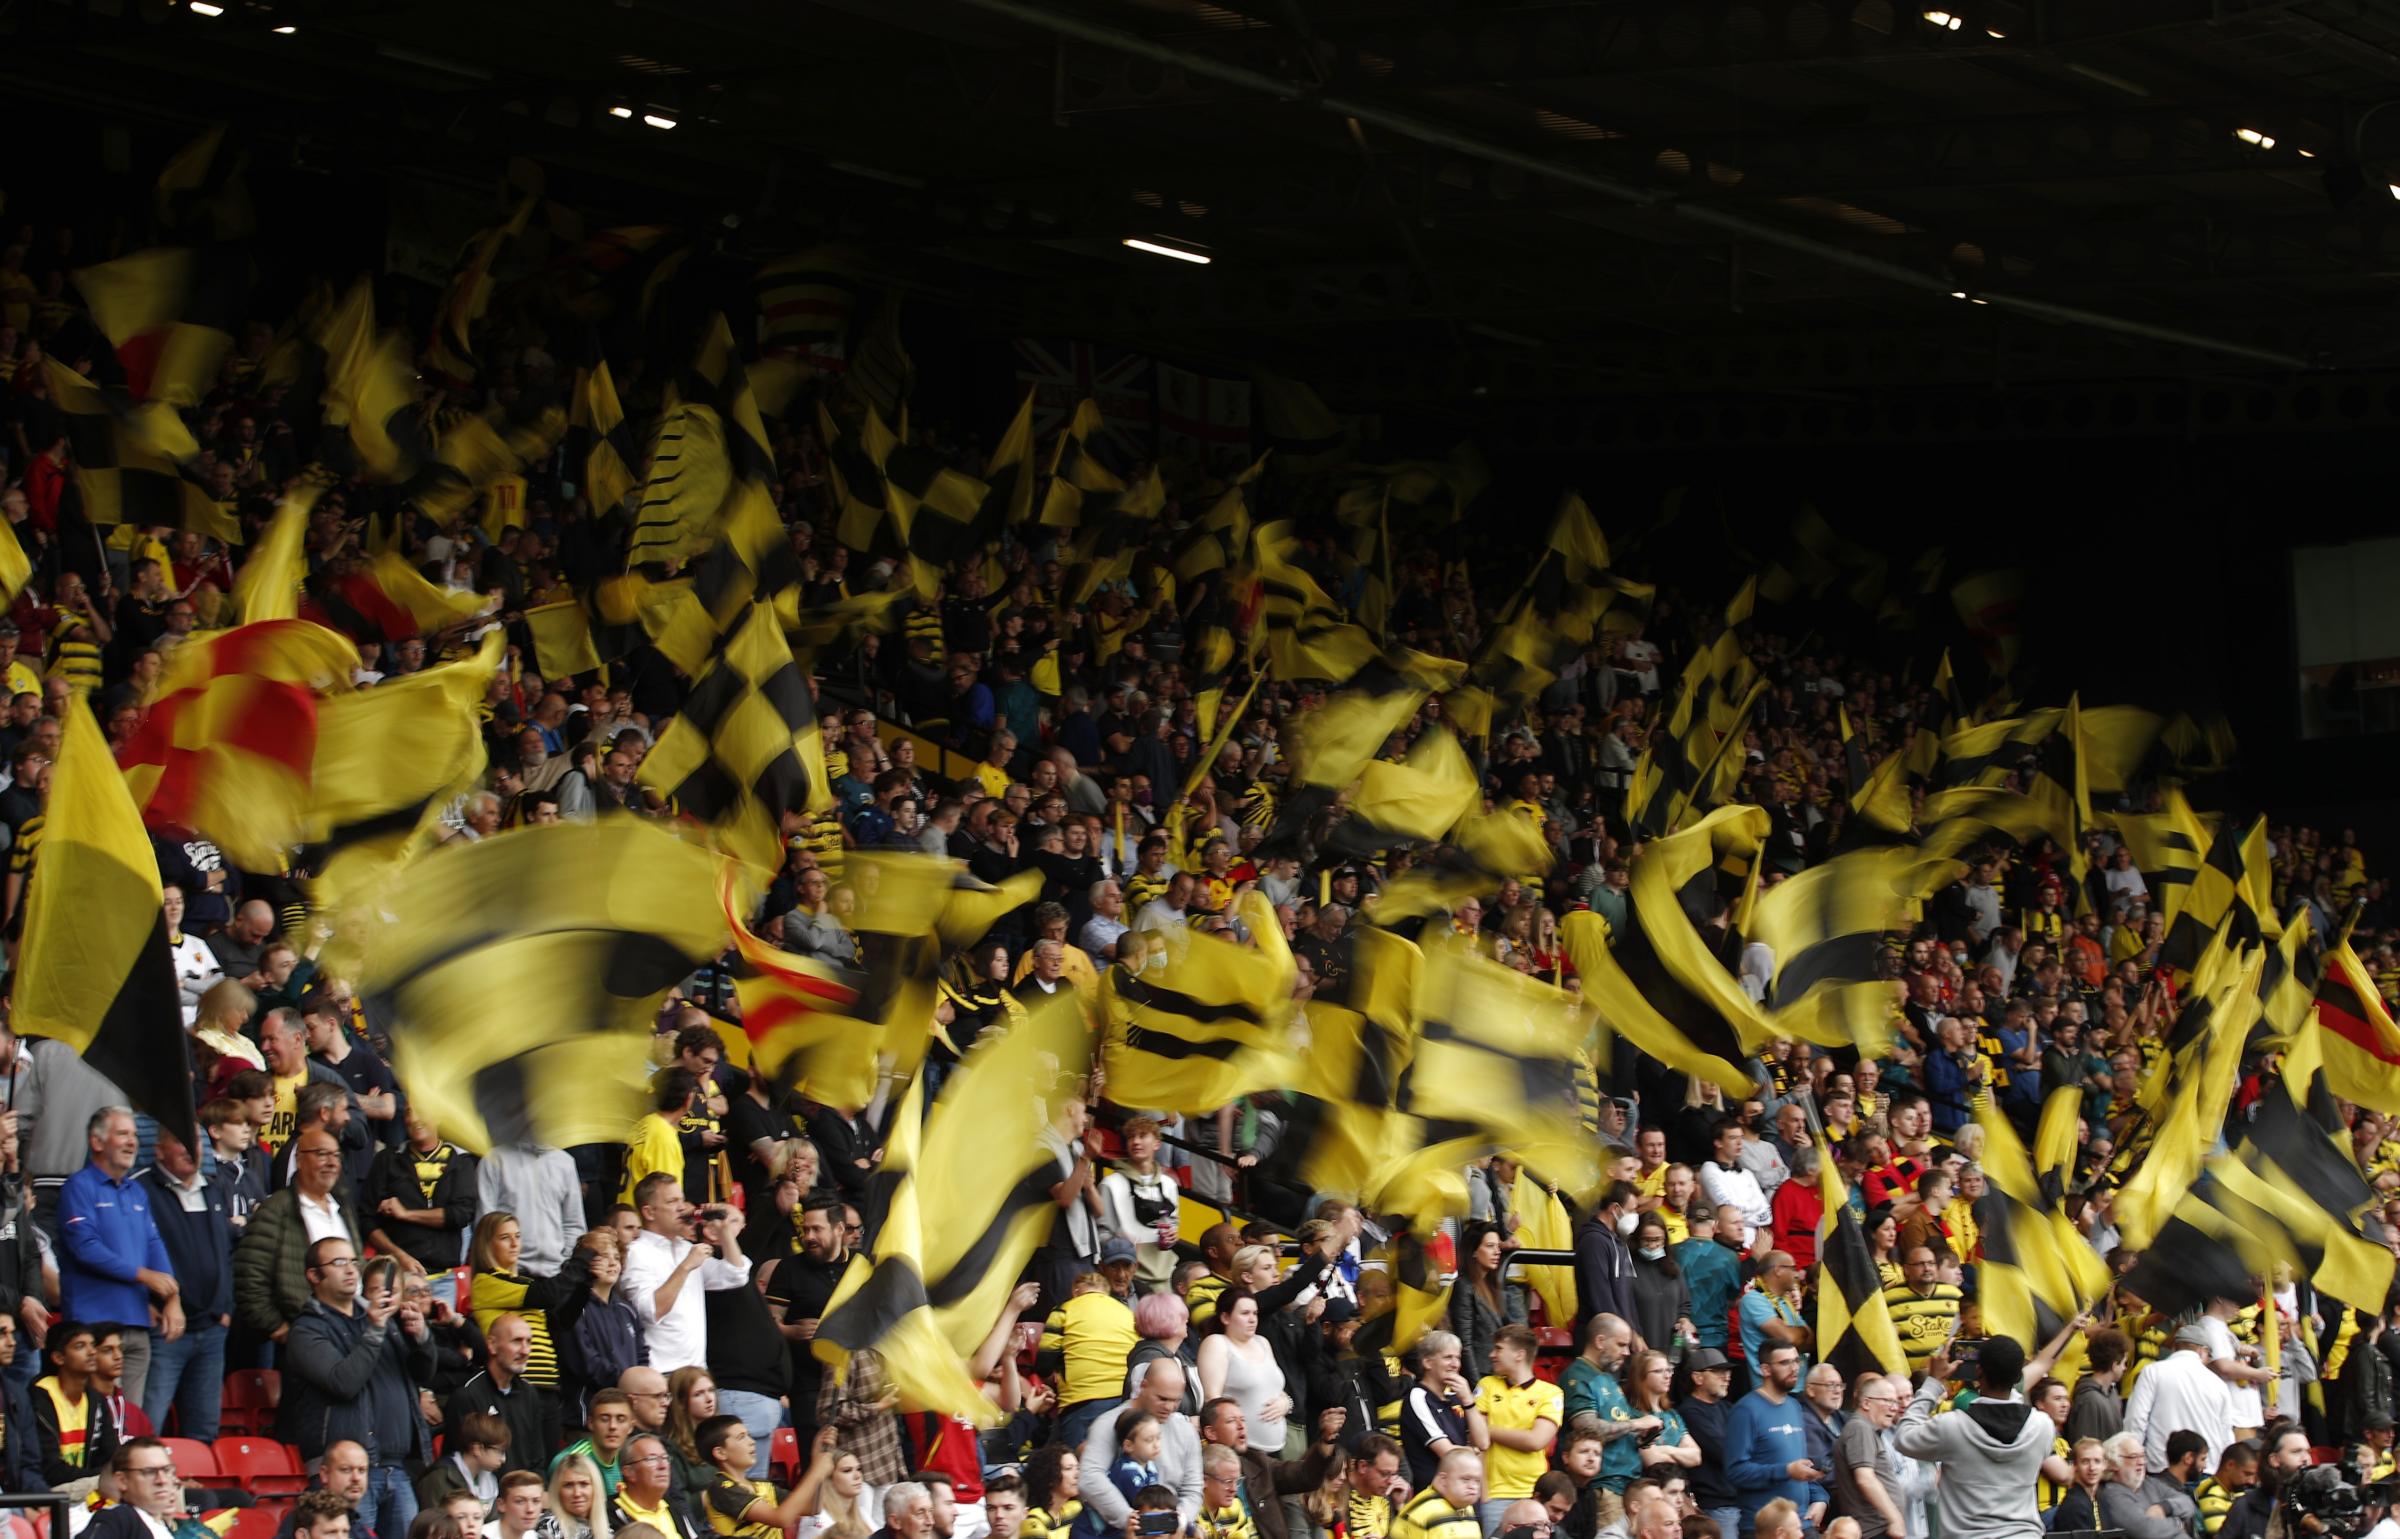 Watford's league fixture against Manchester United sold out